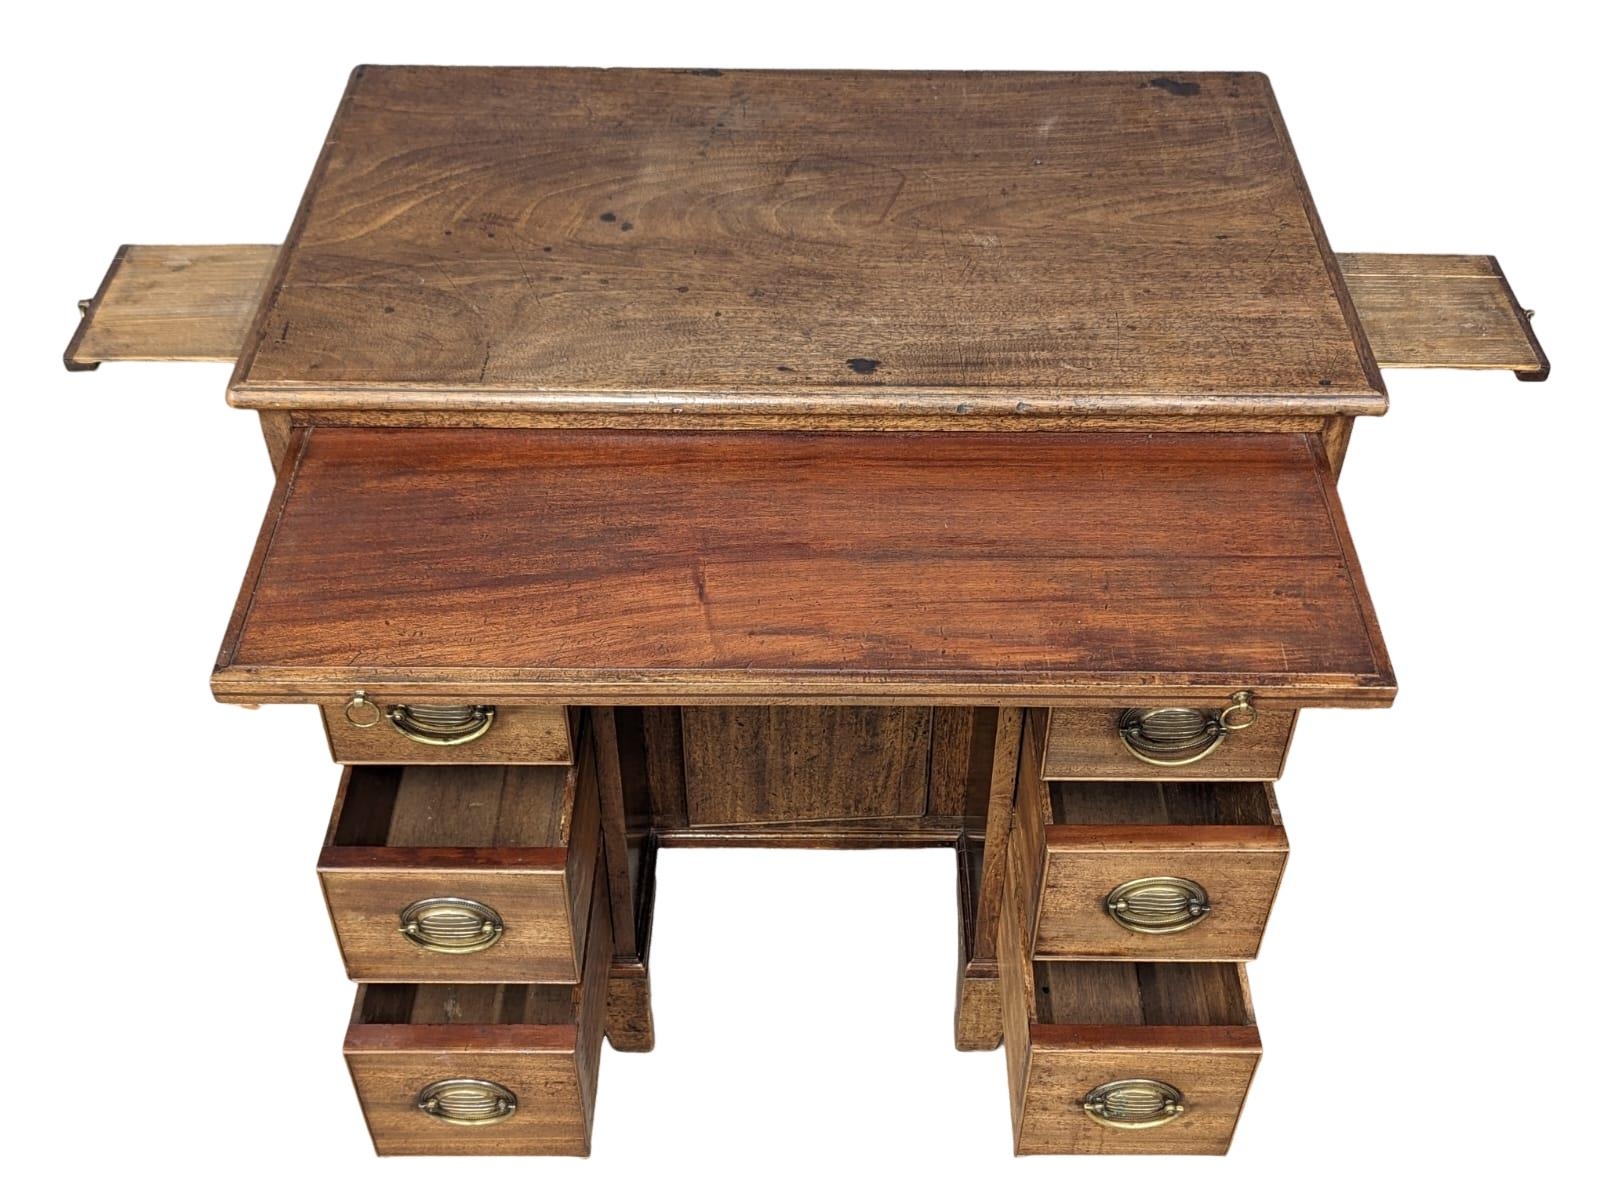 A small Early George III mahogany writing desk with candle stands. Circa 1760-1770. 80x47.5x82.5cm. - Image 2 of 9